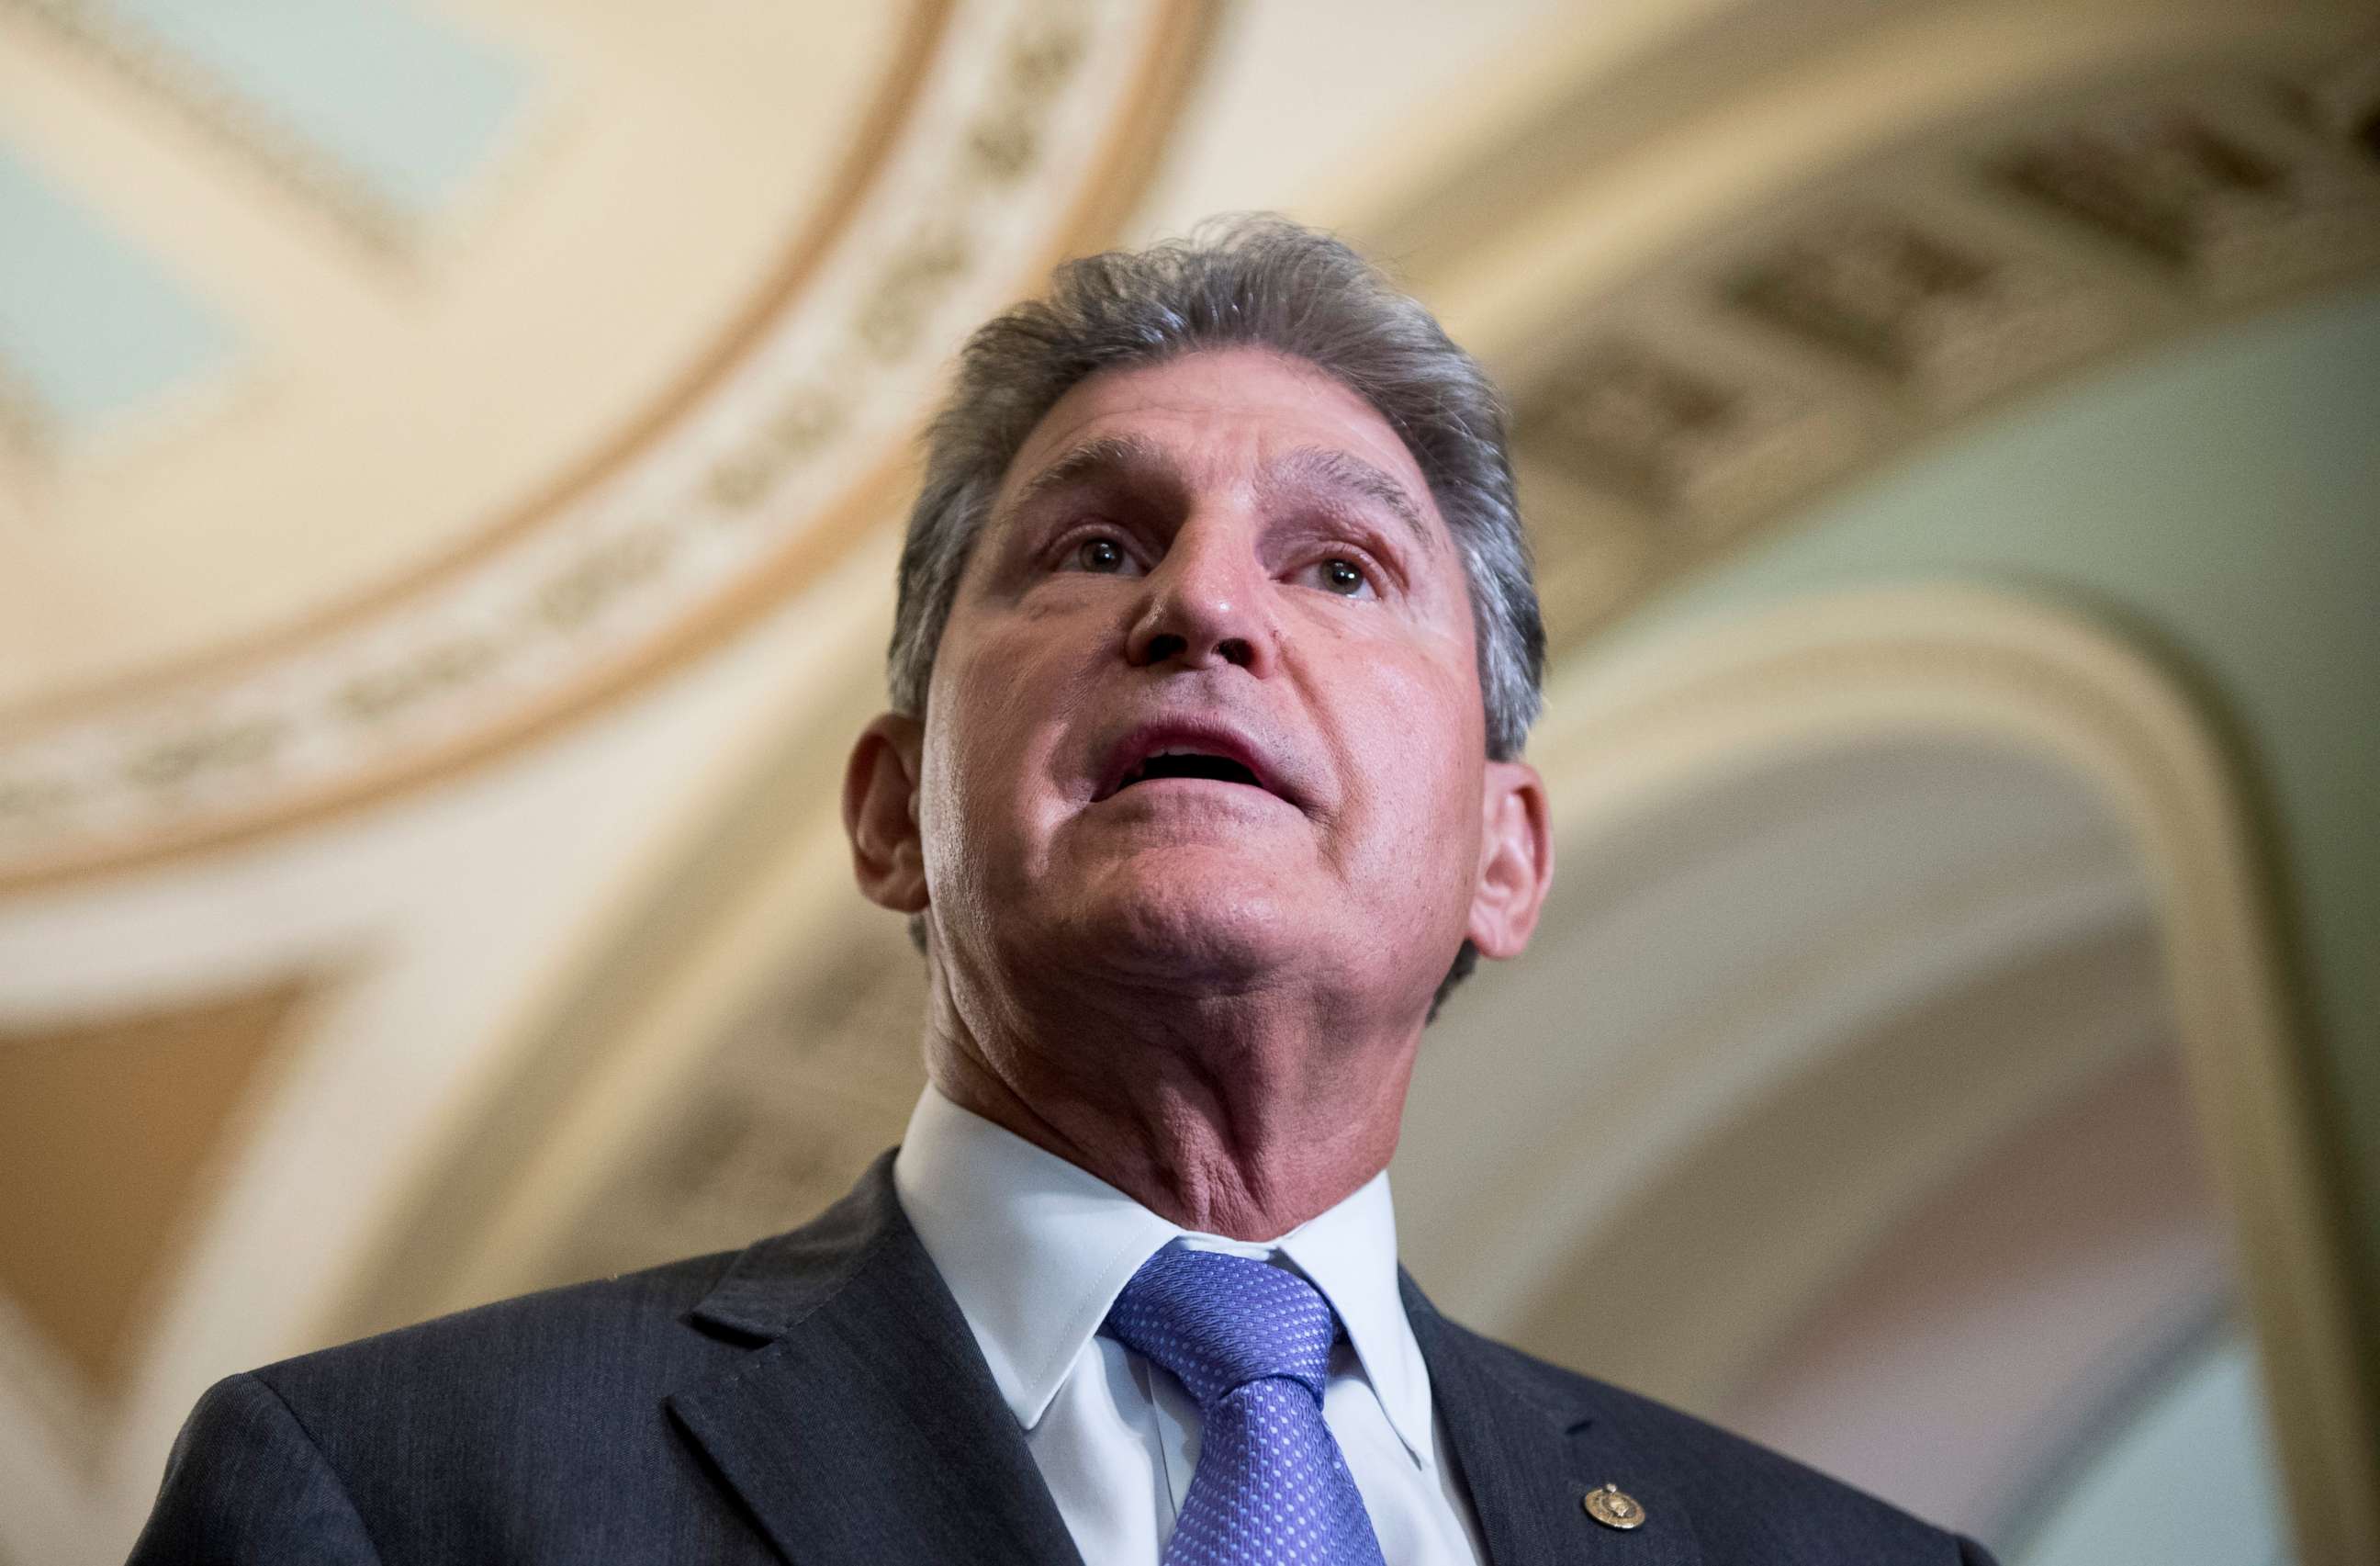 PHOTO: Sen. Joe Manchin speaks during a news conference after the Senate Democrats policy lunch at the Capitol, July 9, 2019.